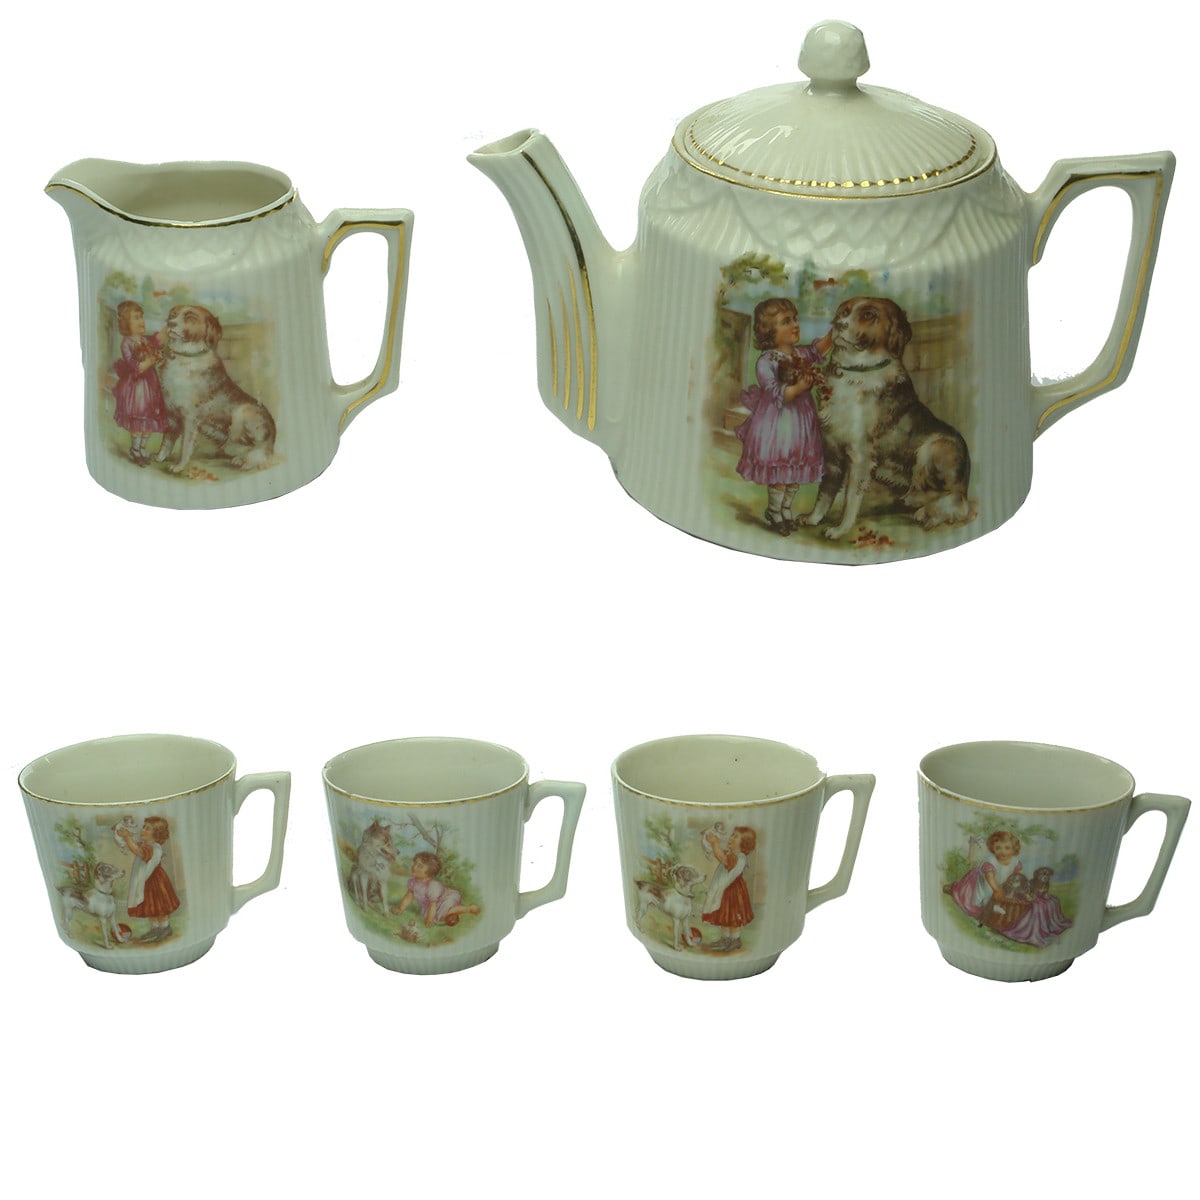 China. Little Teapot, Cream Jug and Four Small Teacups, all with children and dogs.